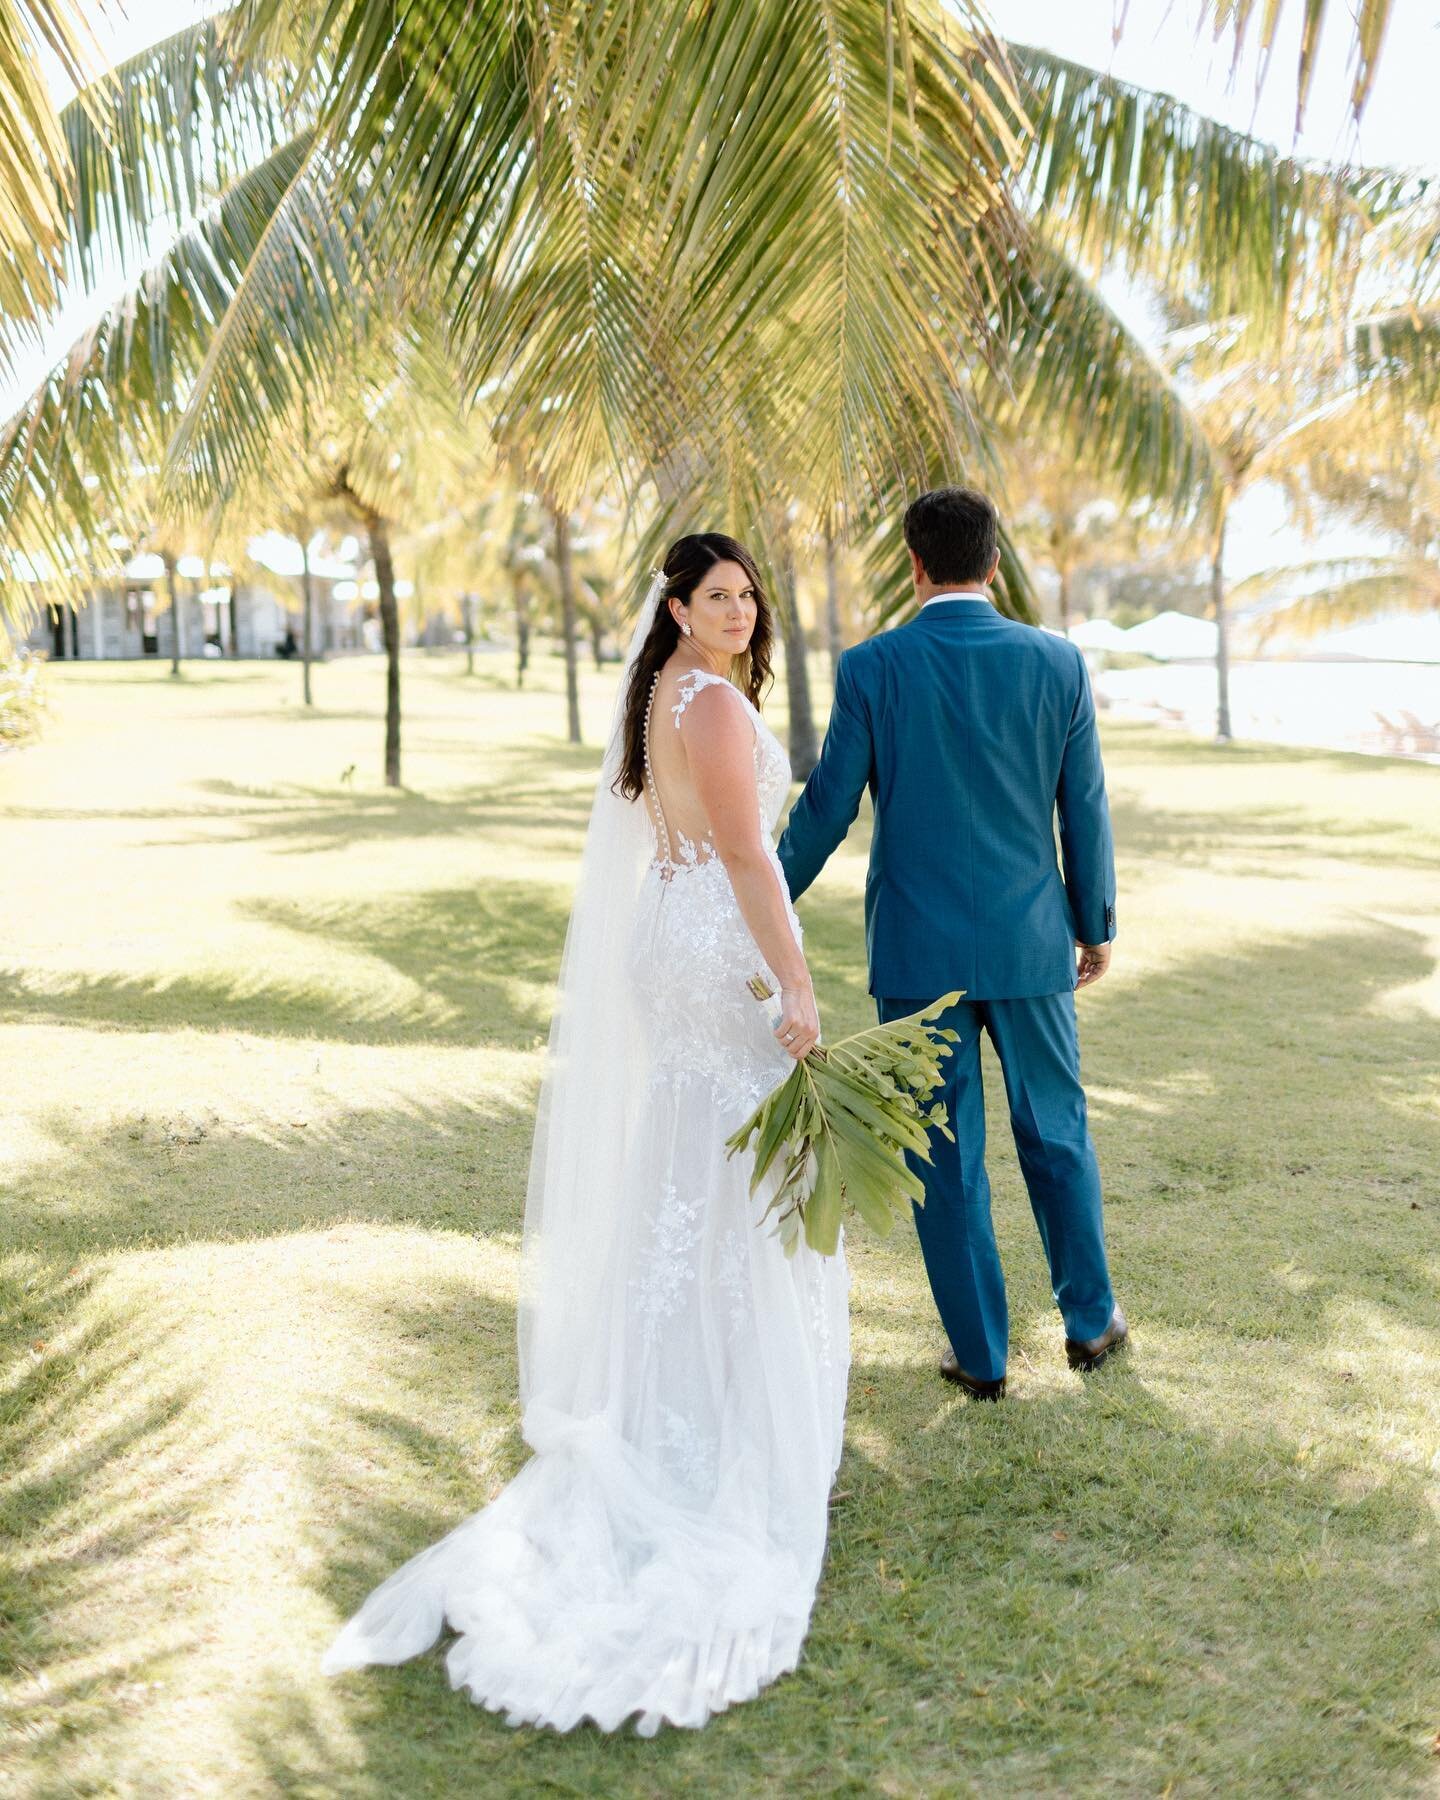 From the archives&hellip; Last summer in the Bahamas with Megan + Erik 🌿 

Shot with @masakathrynphotography